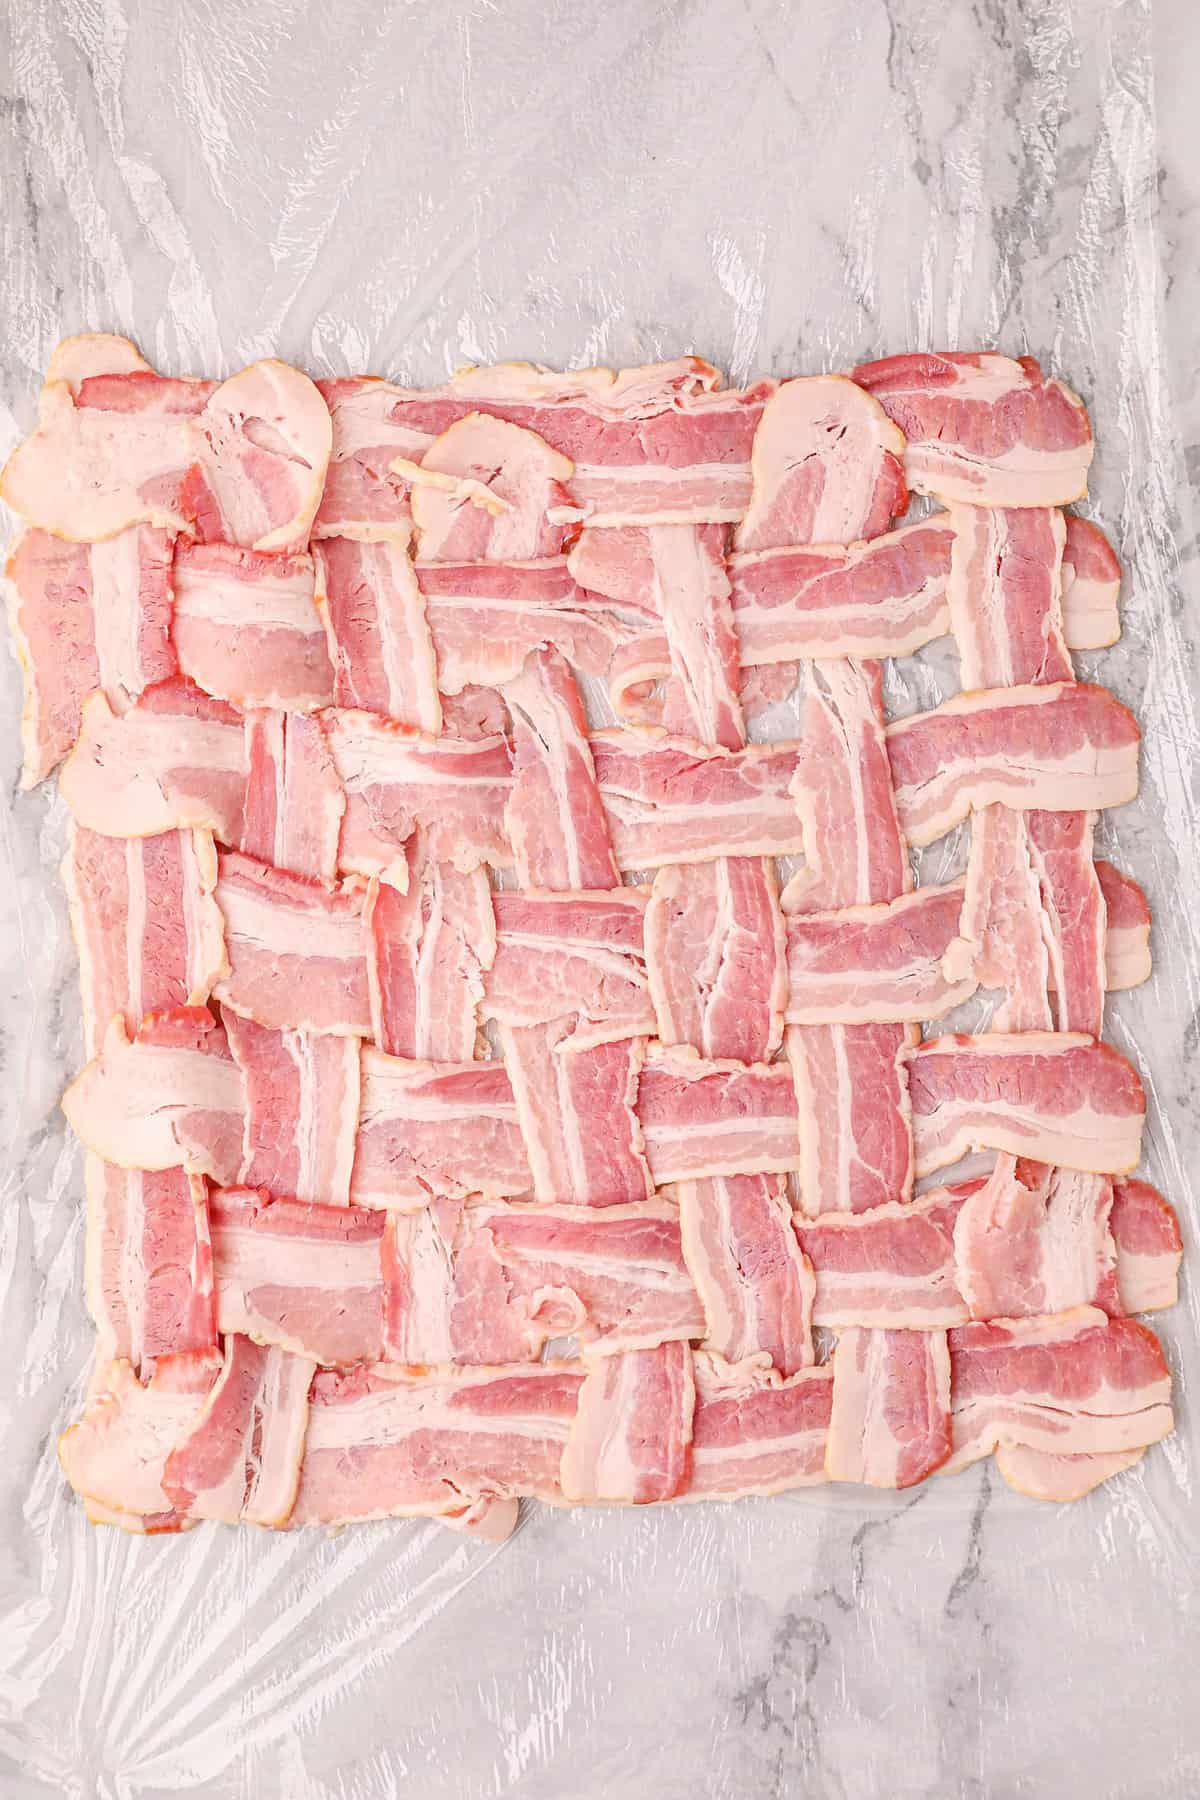 Weaving Bacon as the Base Layer for Smoked Breakfast Fatty